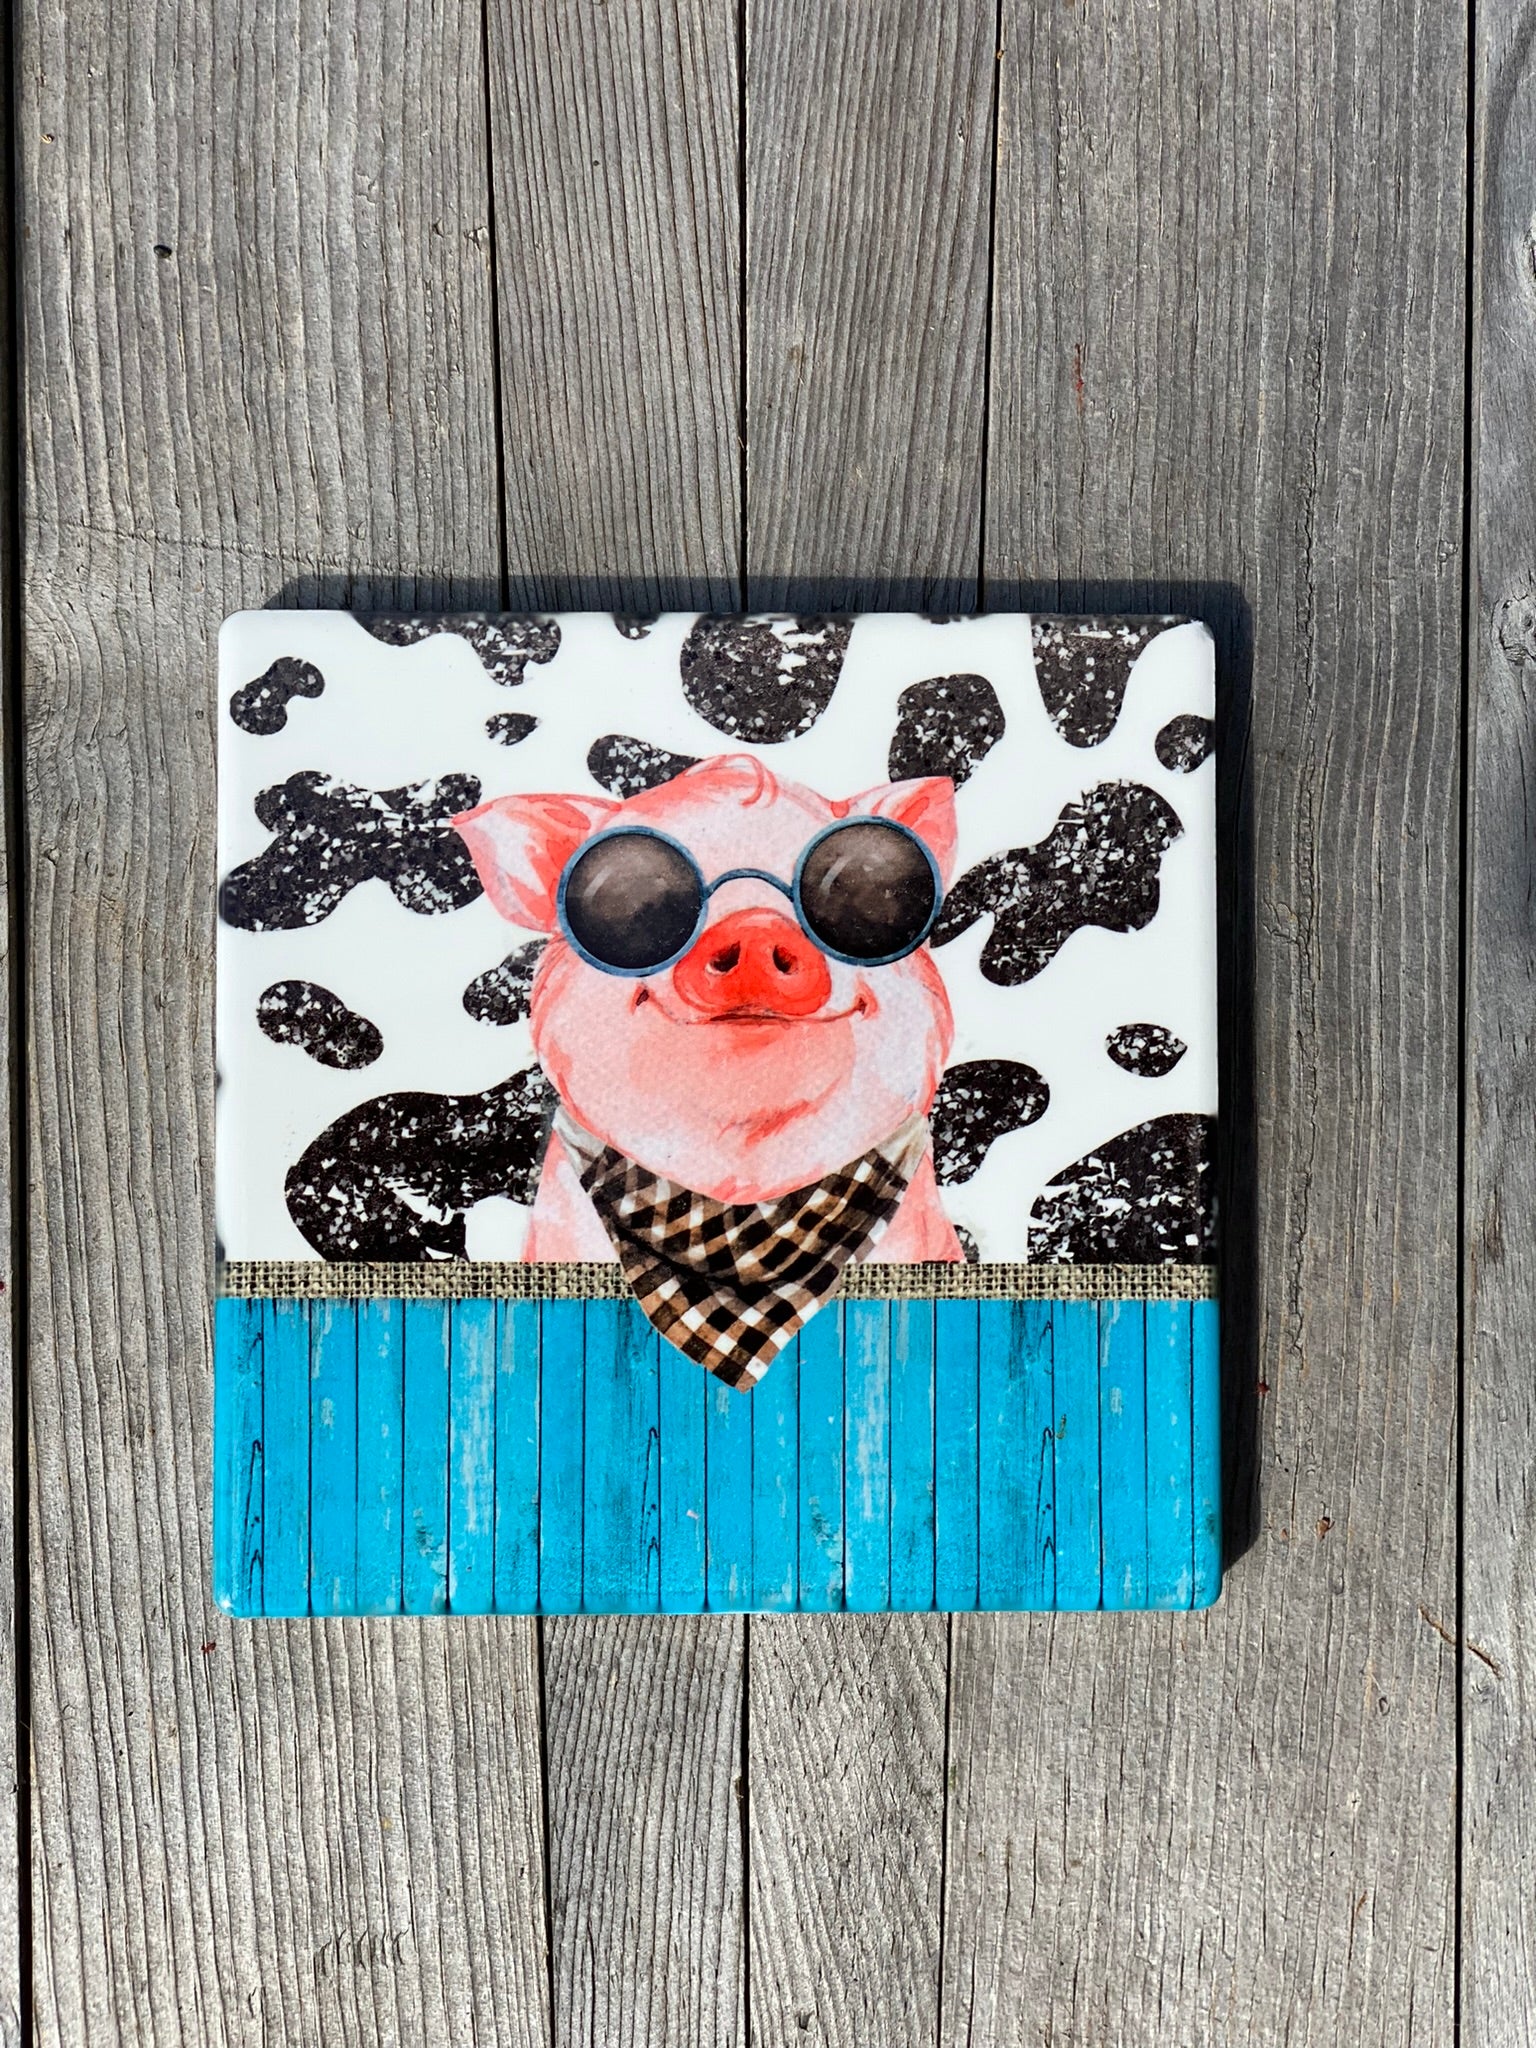 Barnyard Friends Ceramic Sublimation Coasters Pig Cow Ostrich